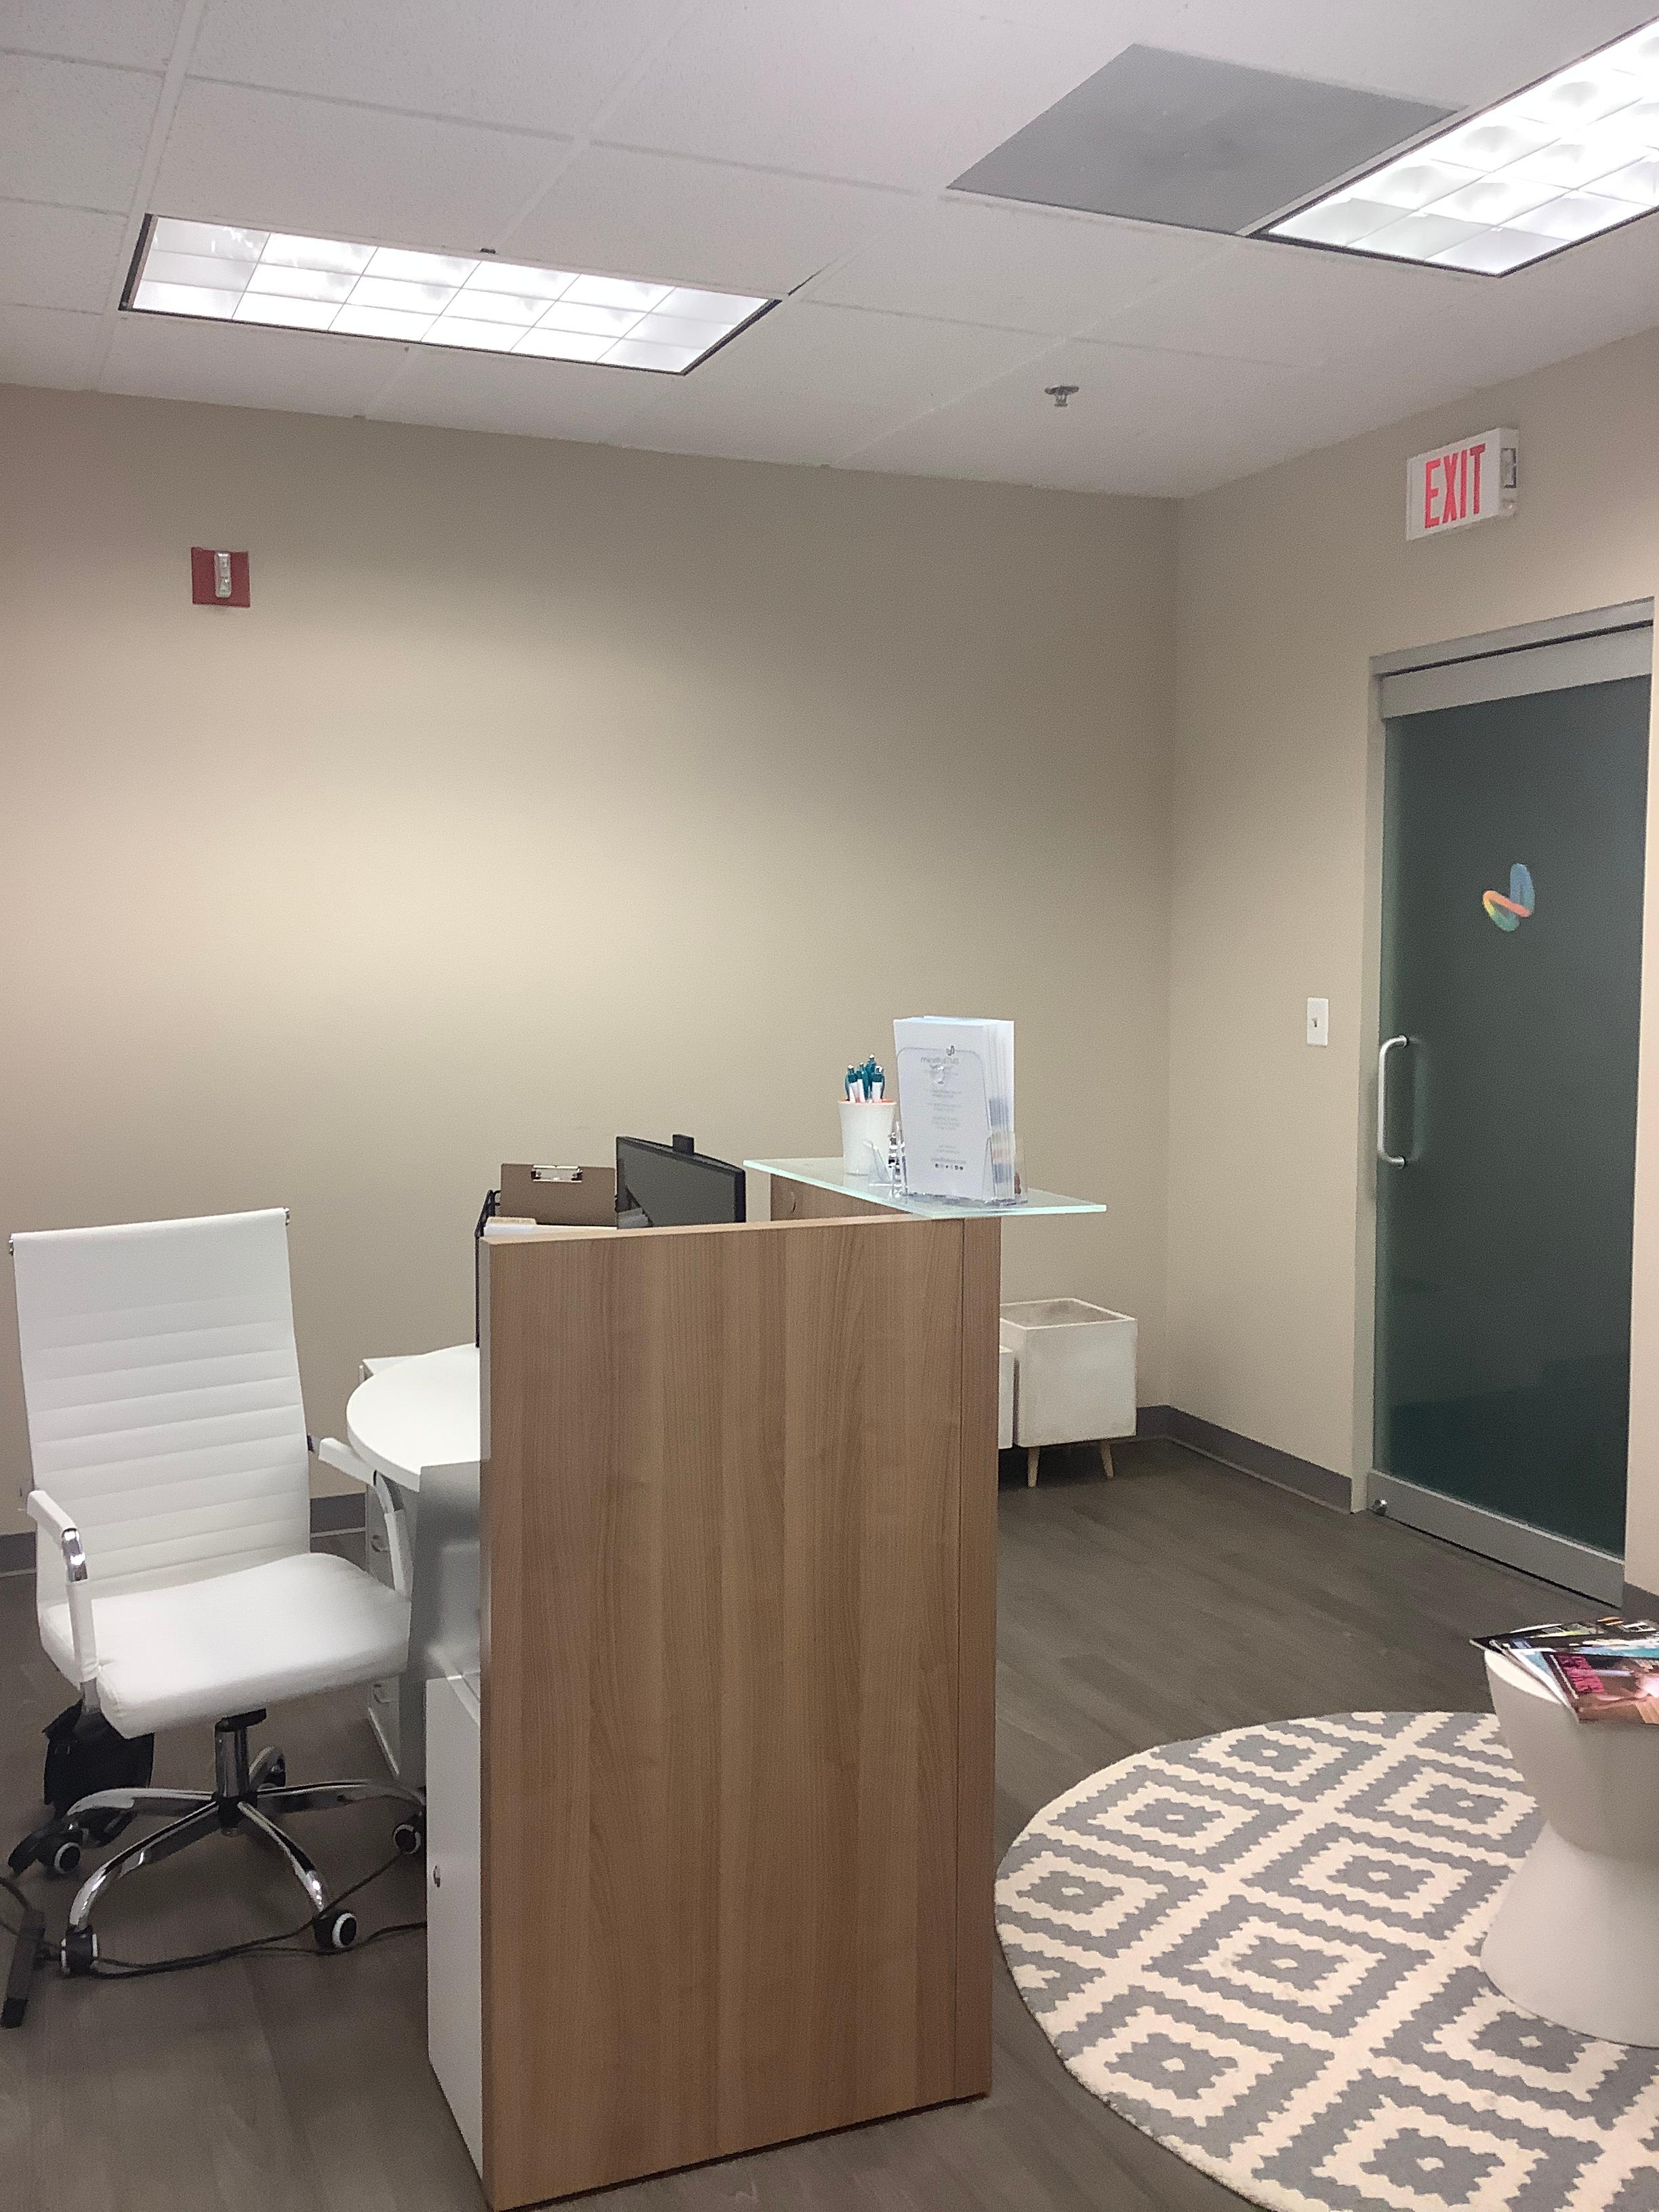 Mindful TMS Neurocare Centers Photo